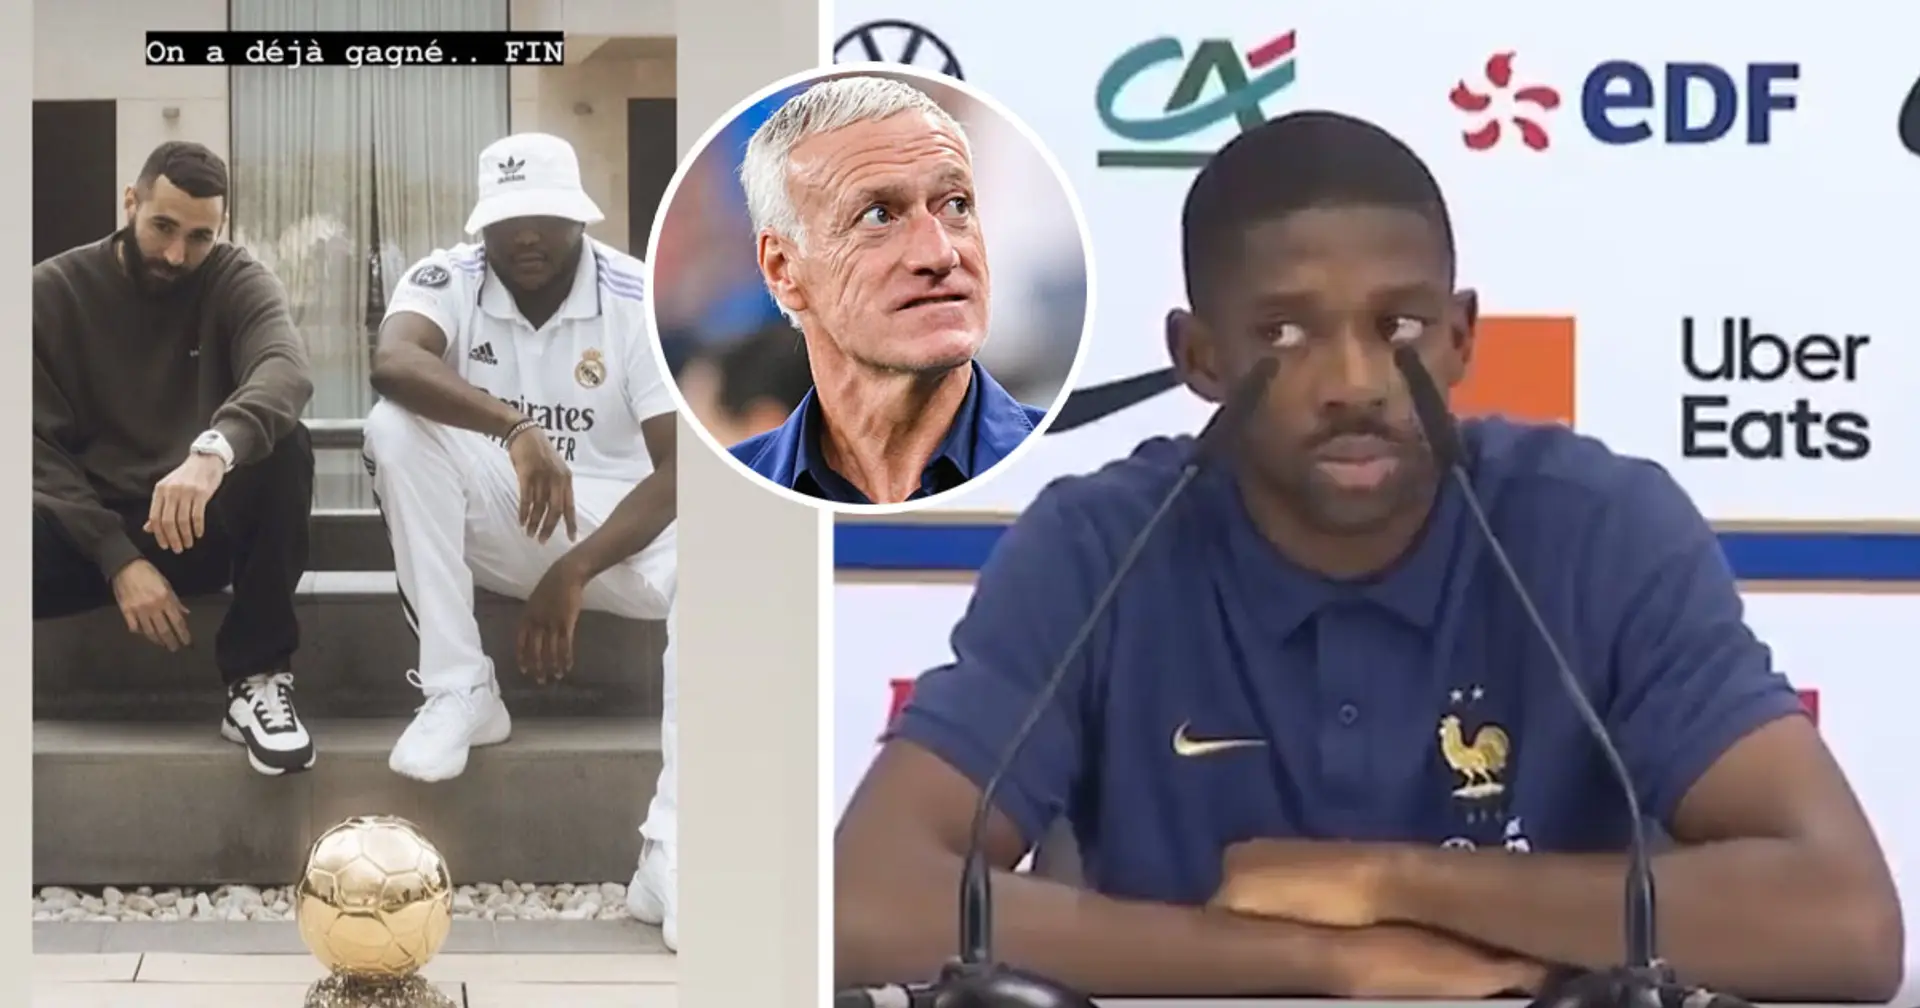 Dembele seems confused by Benzema question - fans believe something weird is going on in France dressing room